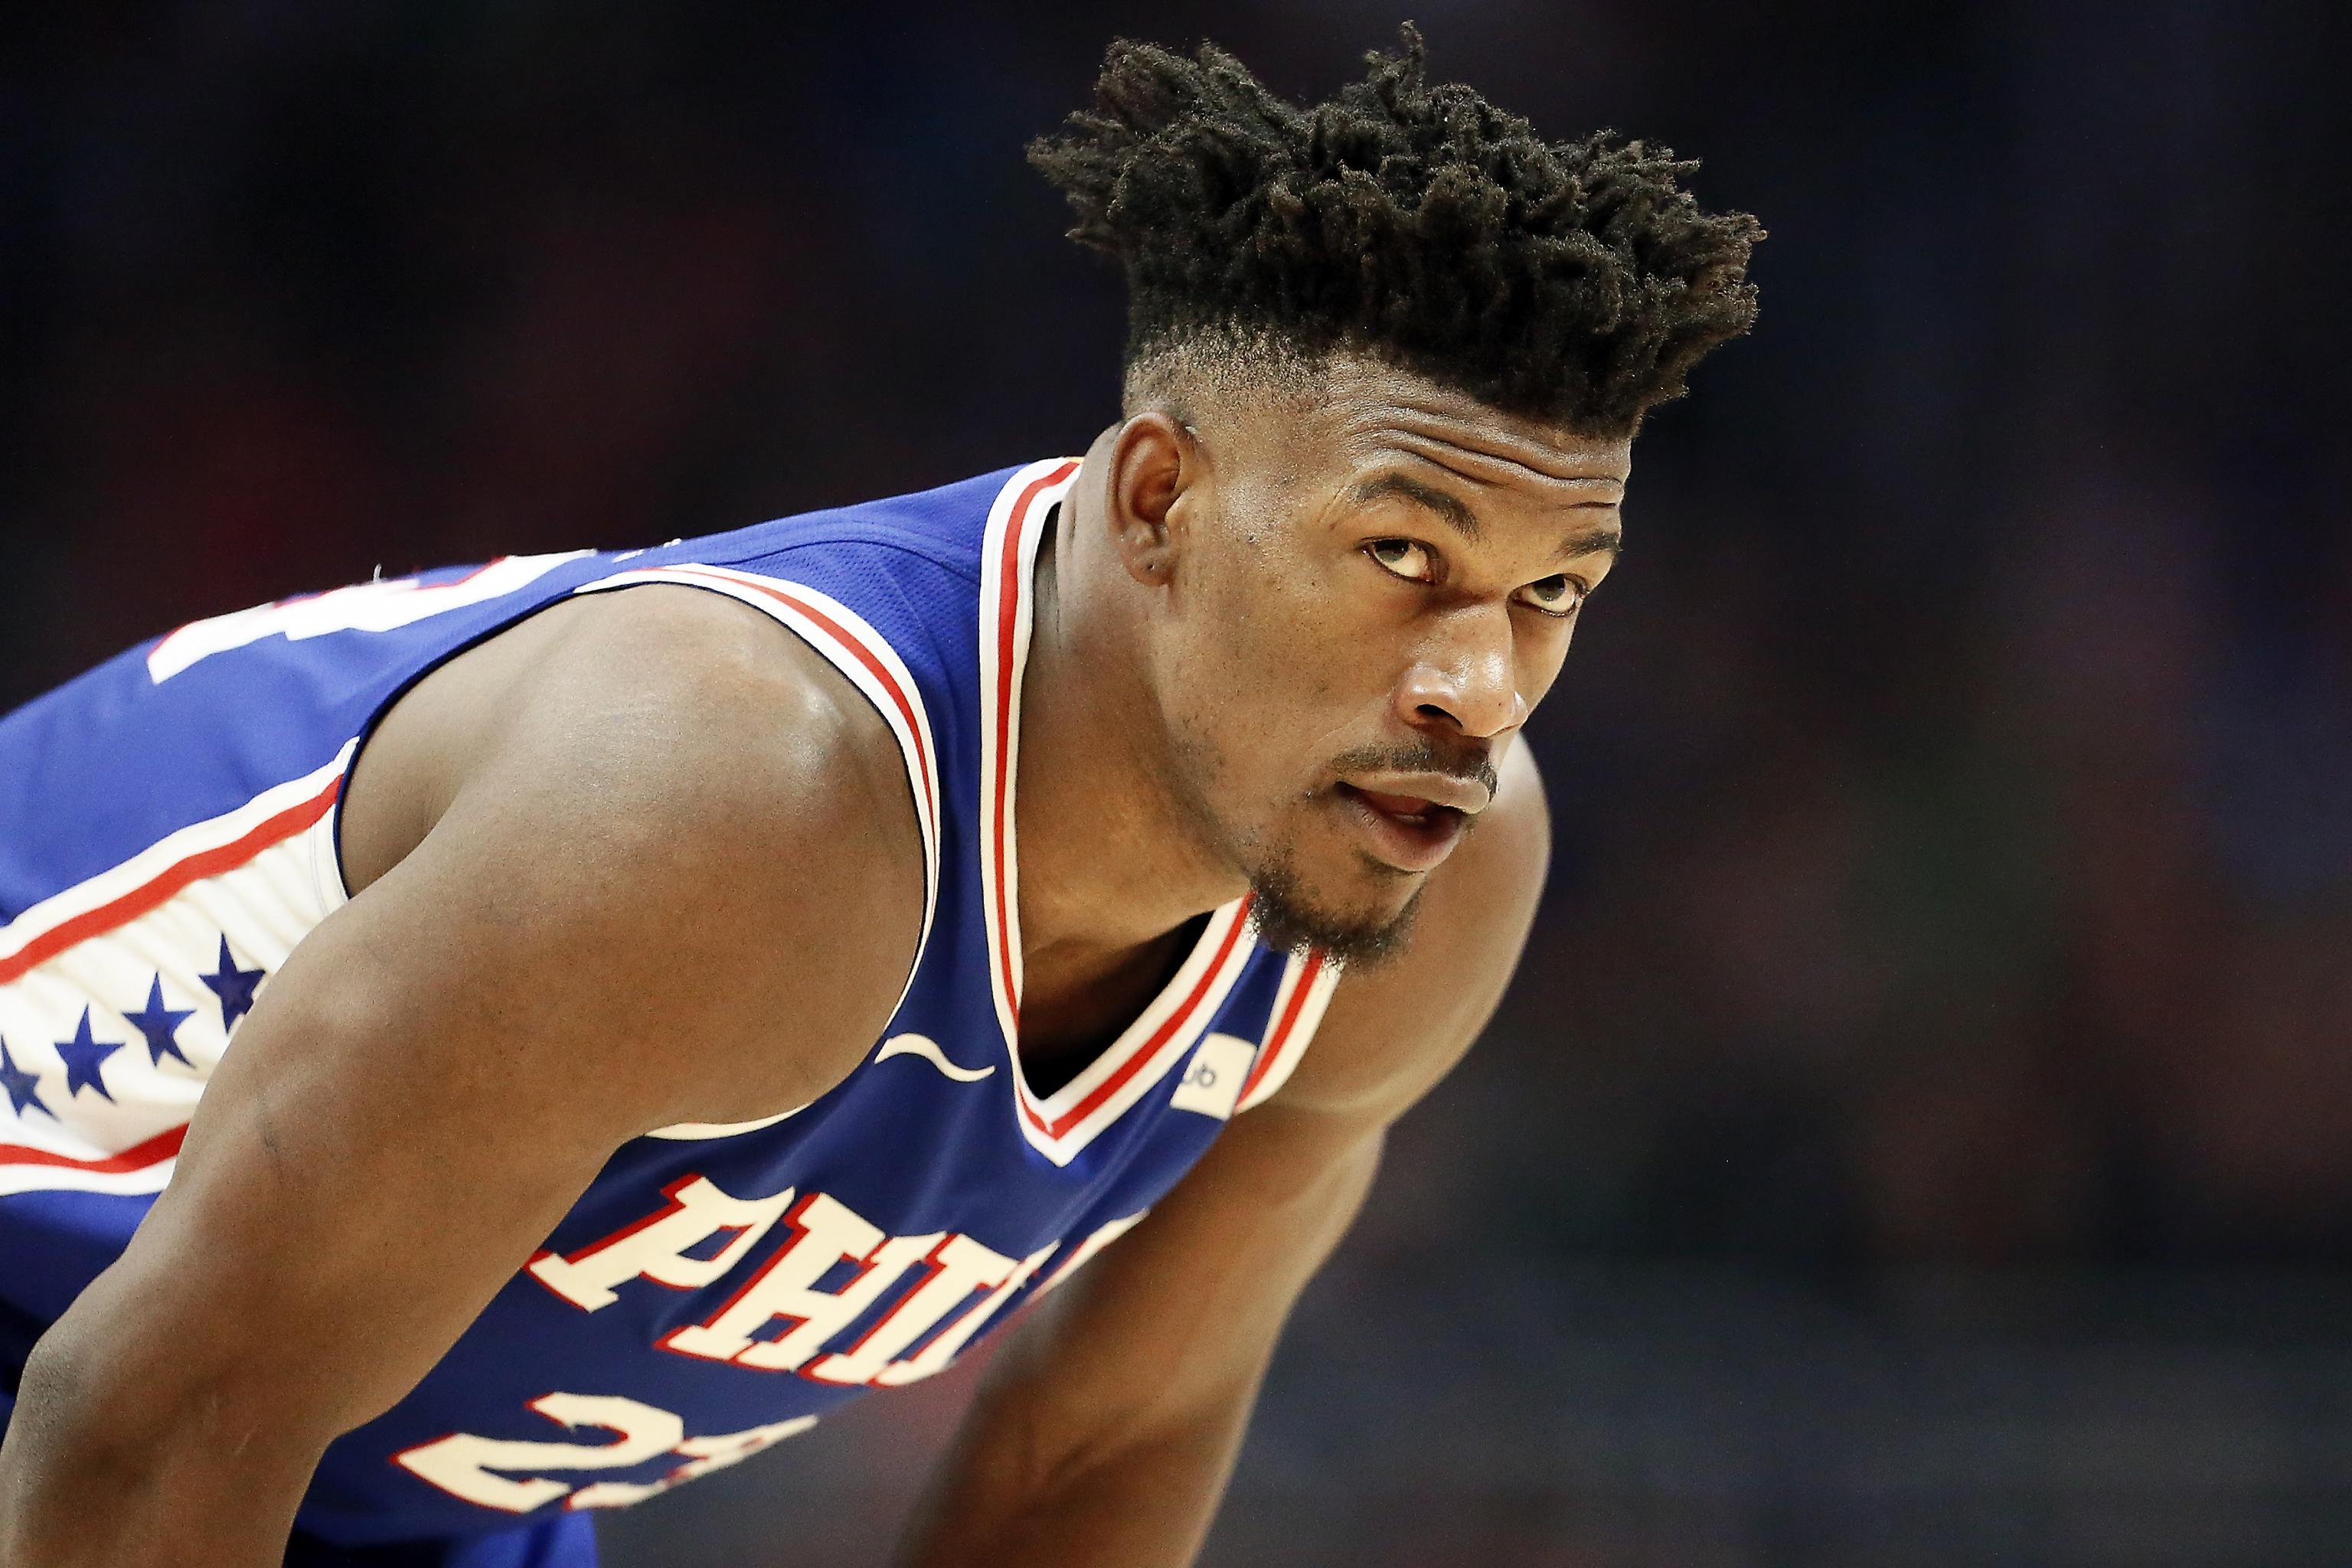 Jimmy Butler lists his reason for new hairstyle